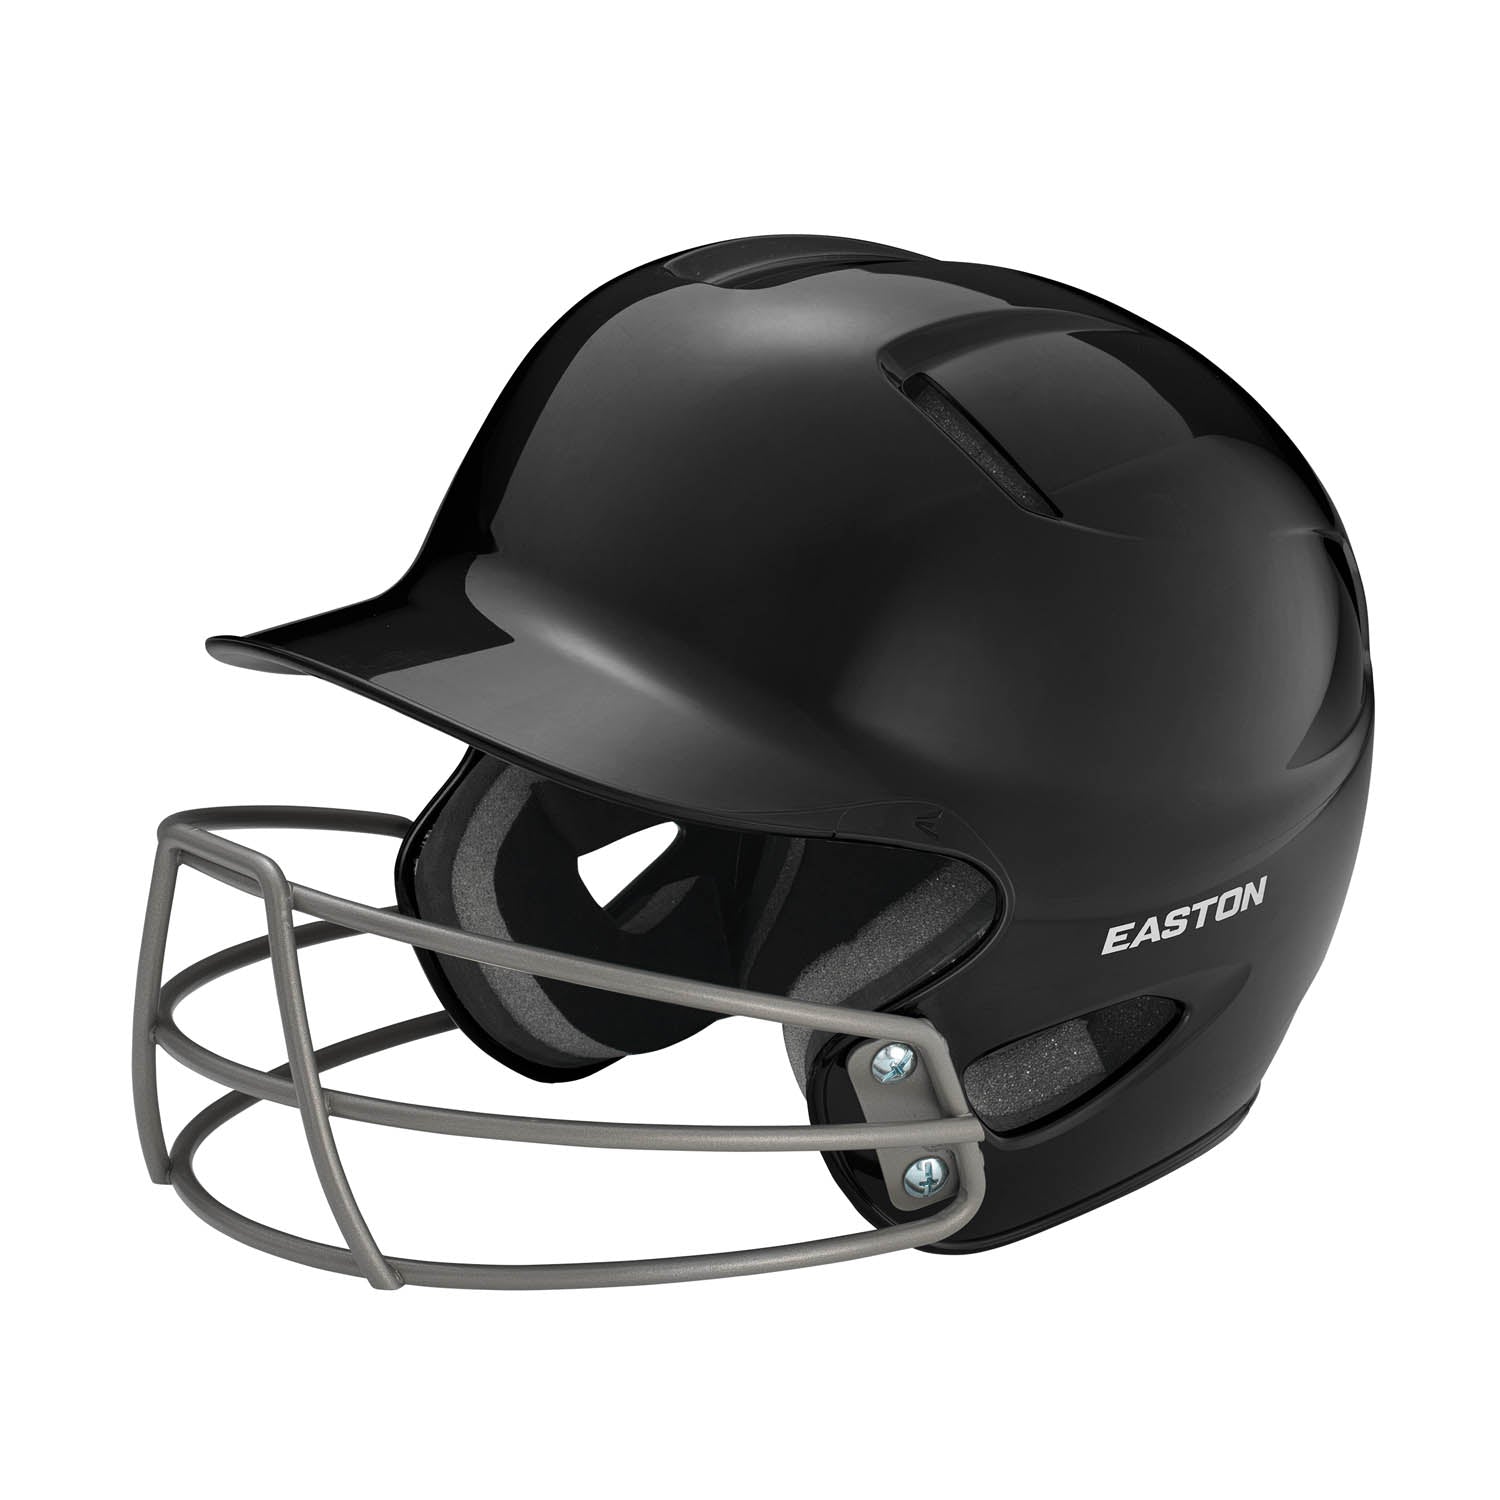 easton-natural-3-0-t-ball-helmet-with-mask